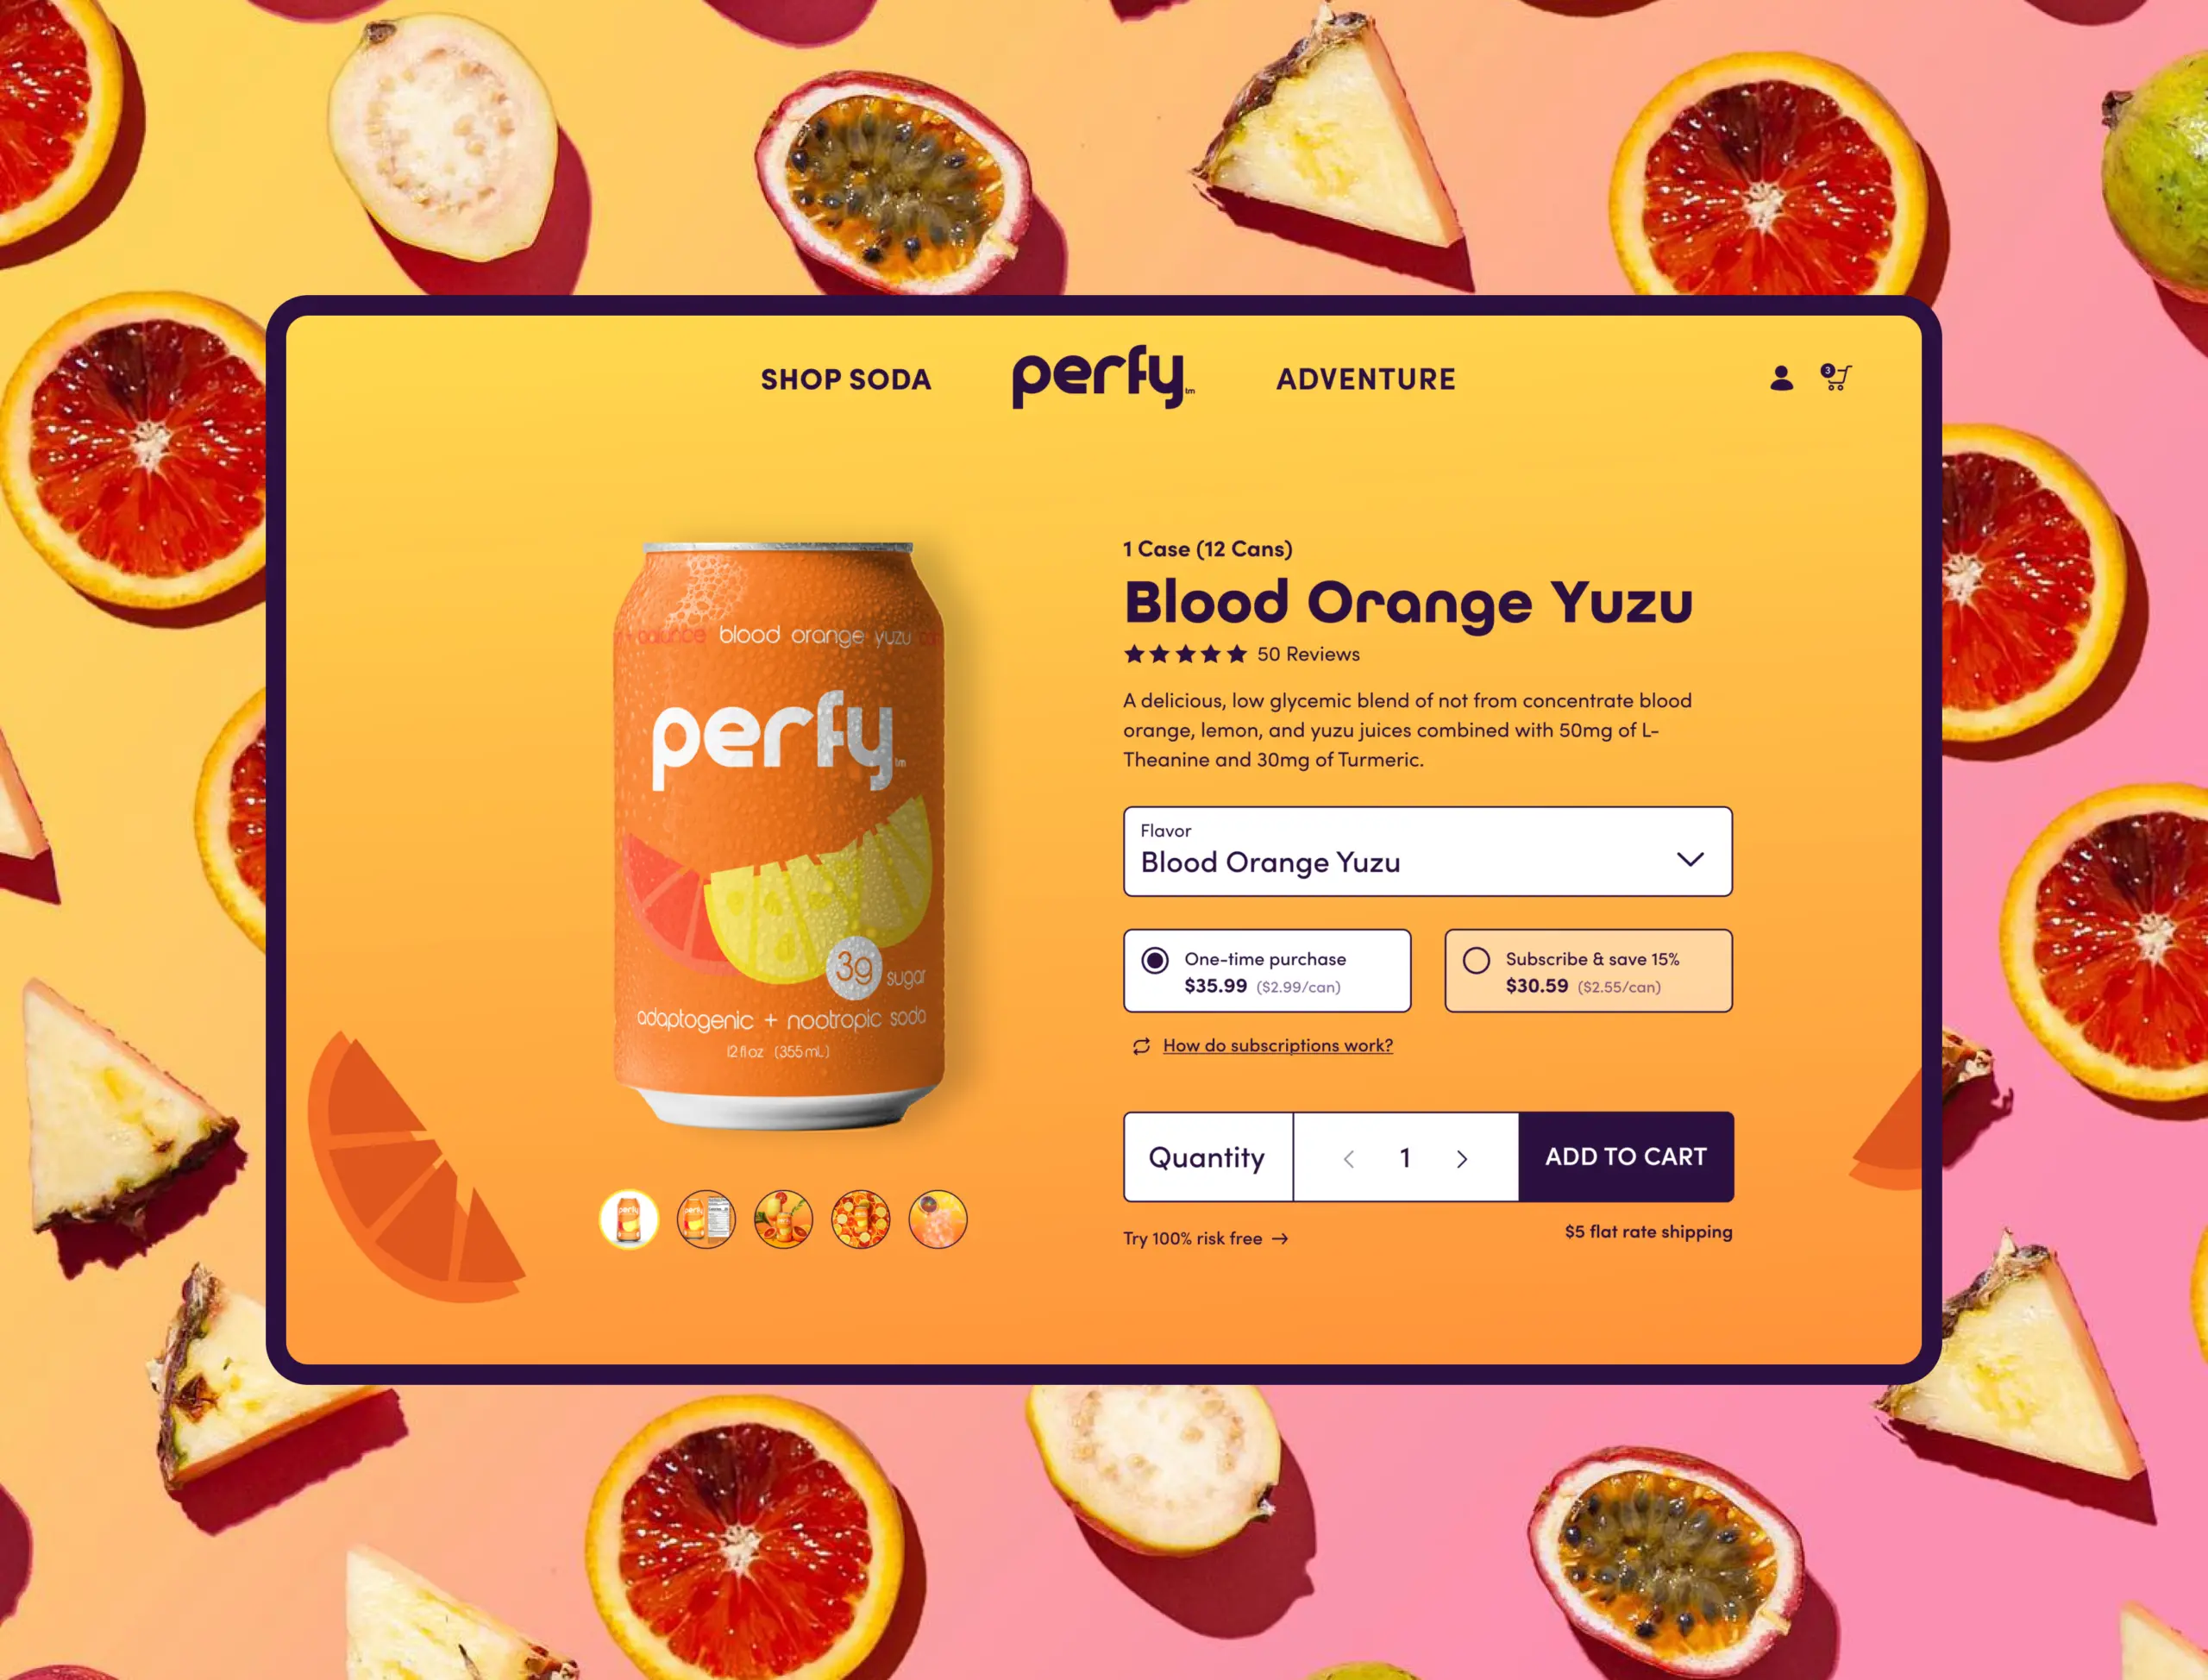 Single shot of Perfy's product detail page buy section UI design